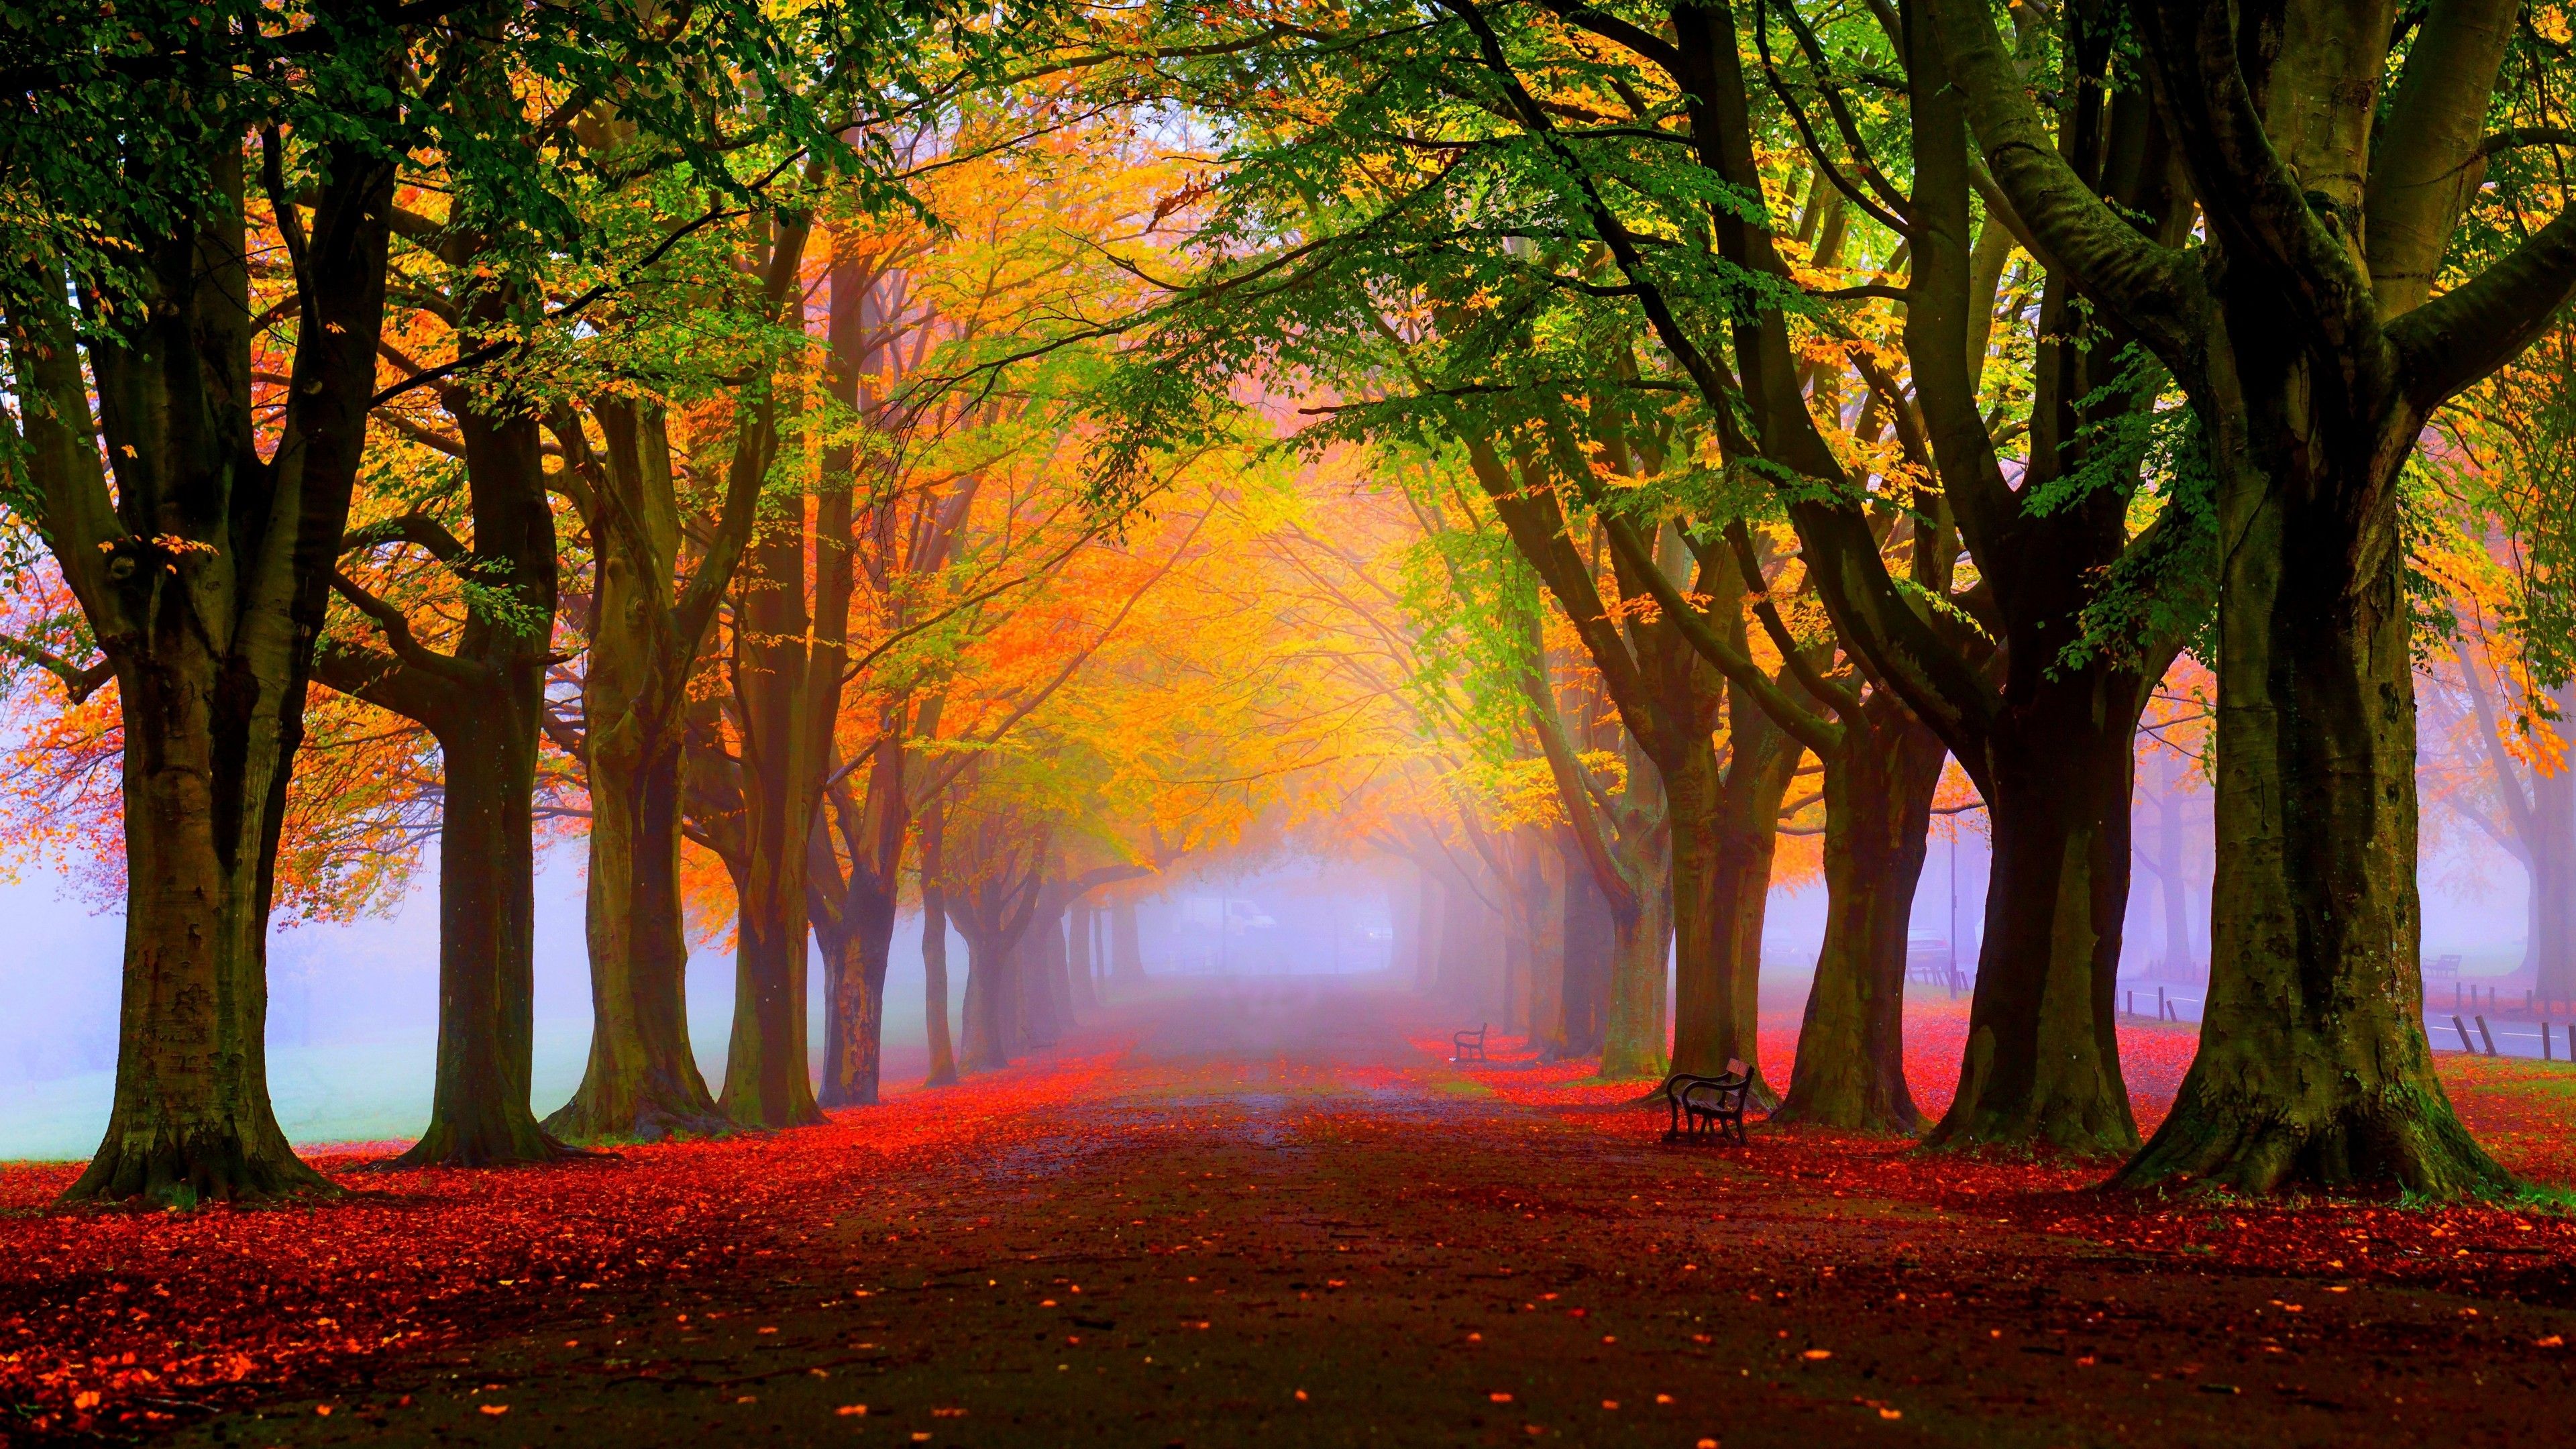 Wallpaper Autumn, Fall, Tress, Fog, Foliage, 5K, Nature,. Wallpaper for iPhone, Android, Mobile and Desktop